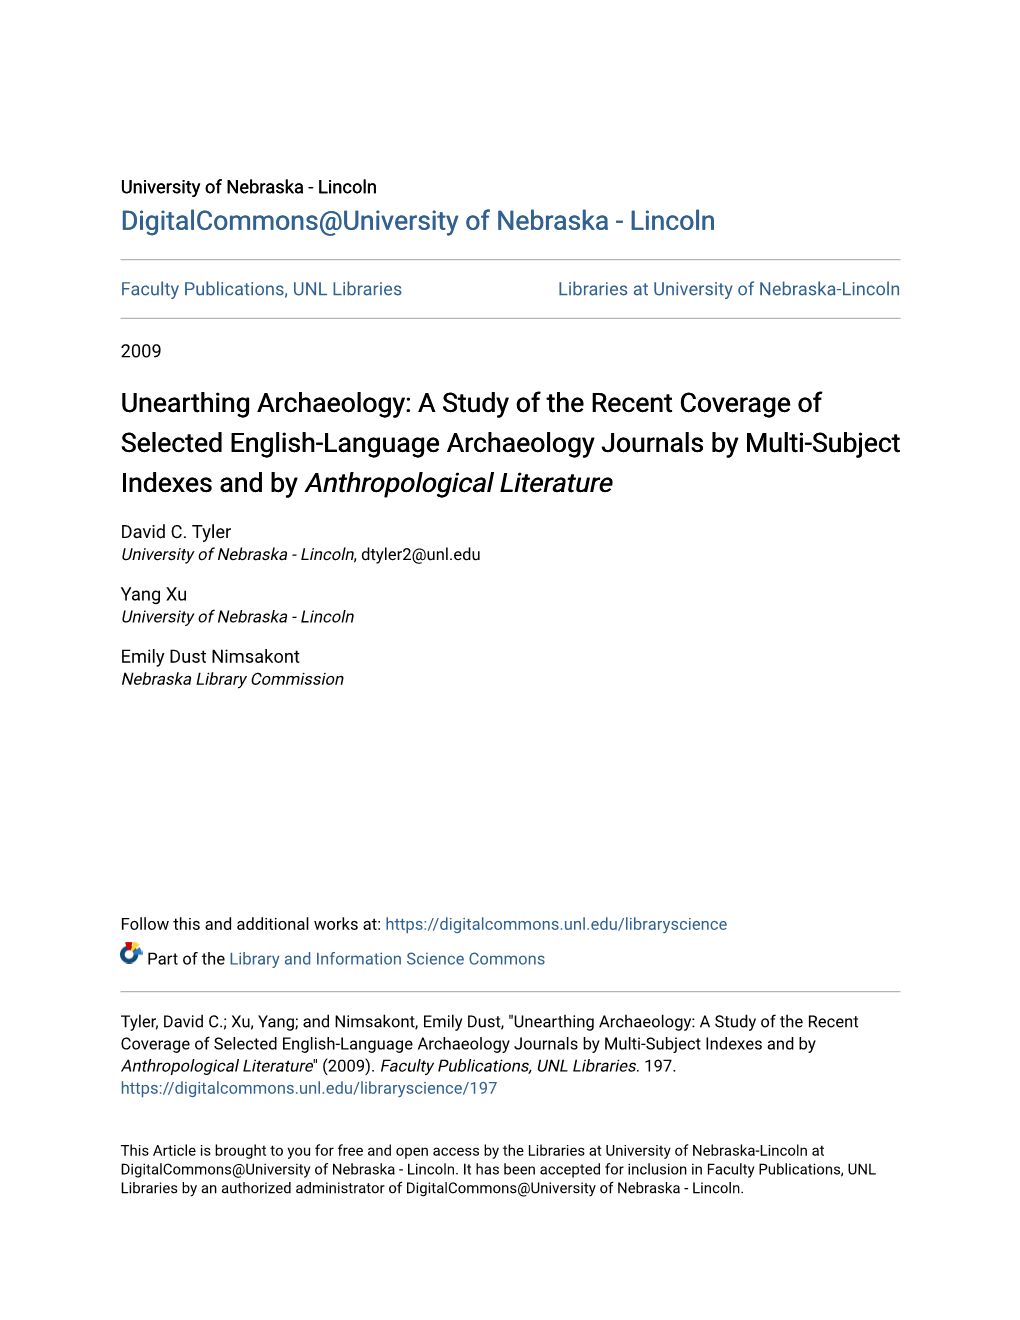 Unearthing Archaeology: a Study of the Recent Coverage of Selected English-Language Archaeology Journals by Multi-Subject Indexes and by Anthropological Literature